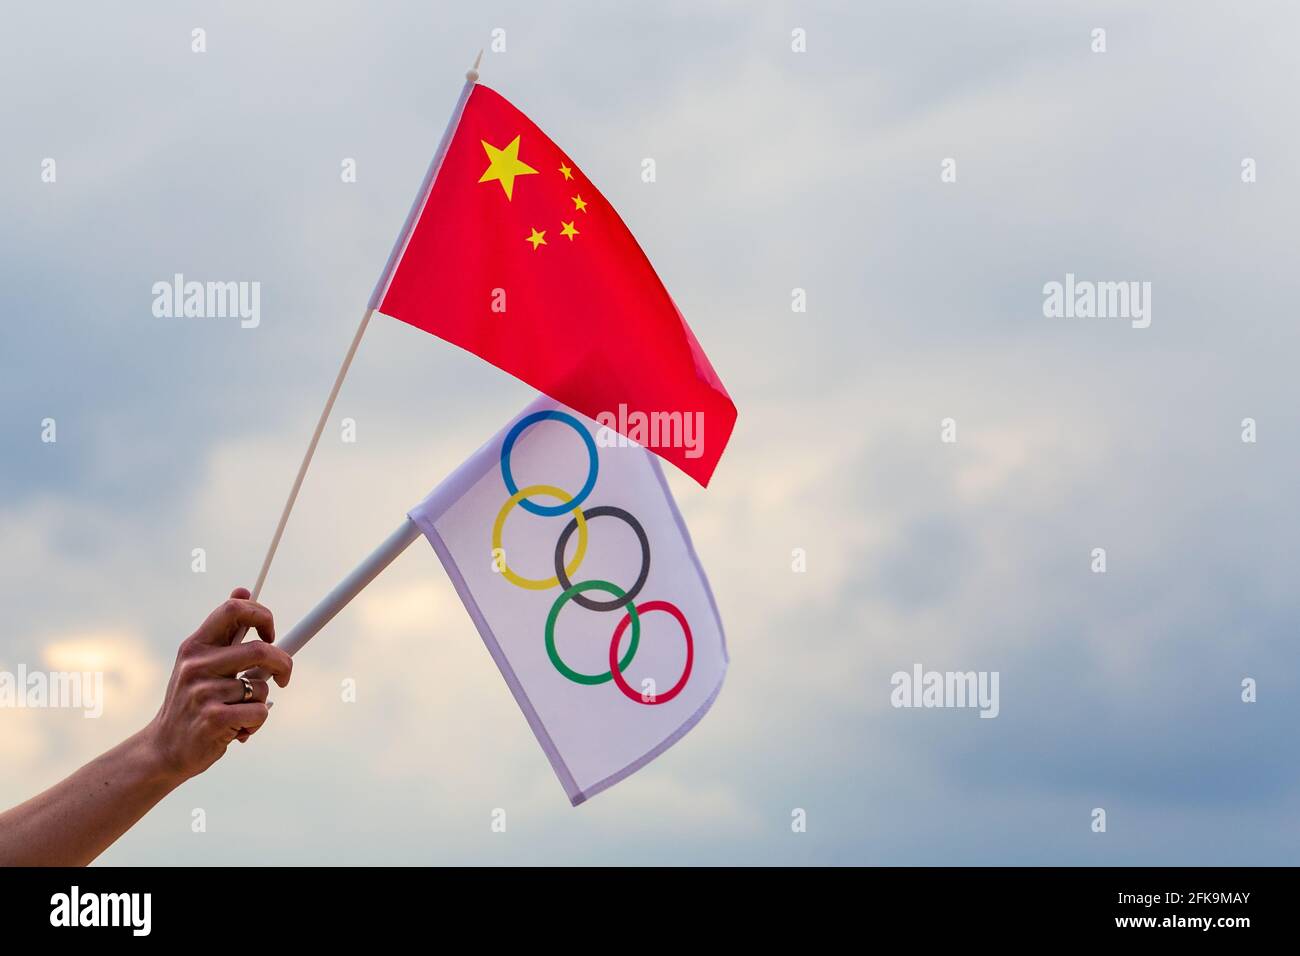 Fan waving the national flag of  China and the Olympic flag with symbol olympics rings. Stock Photo